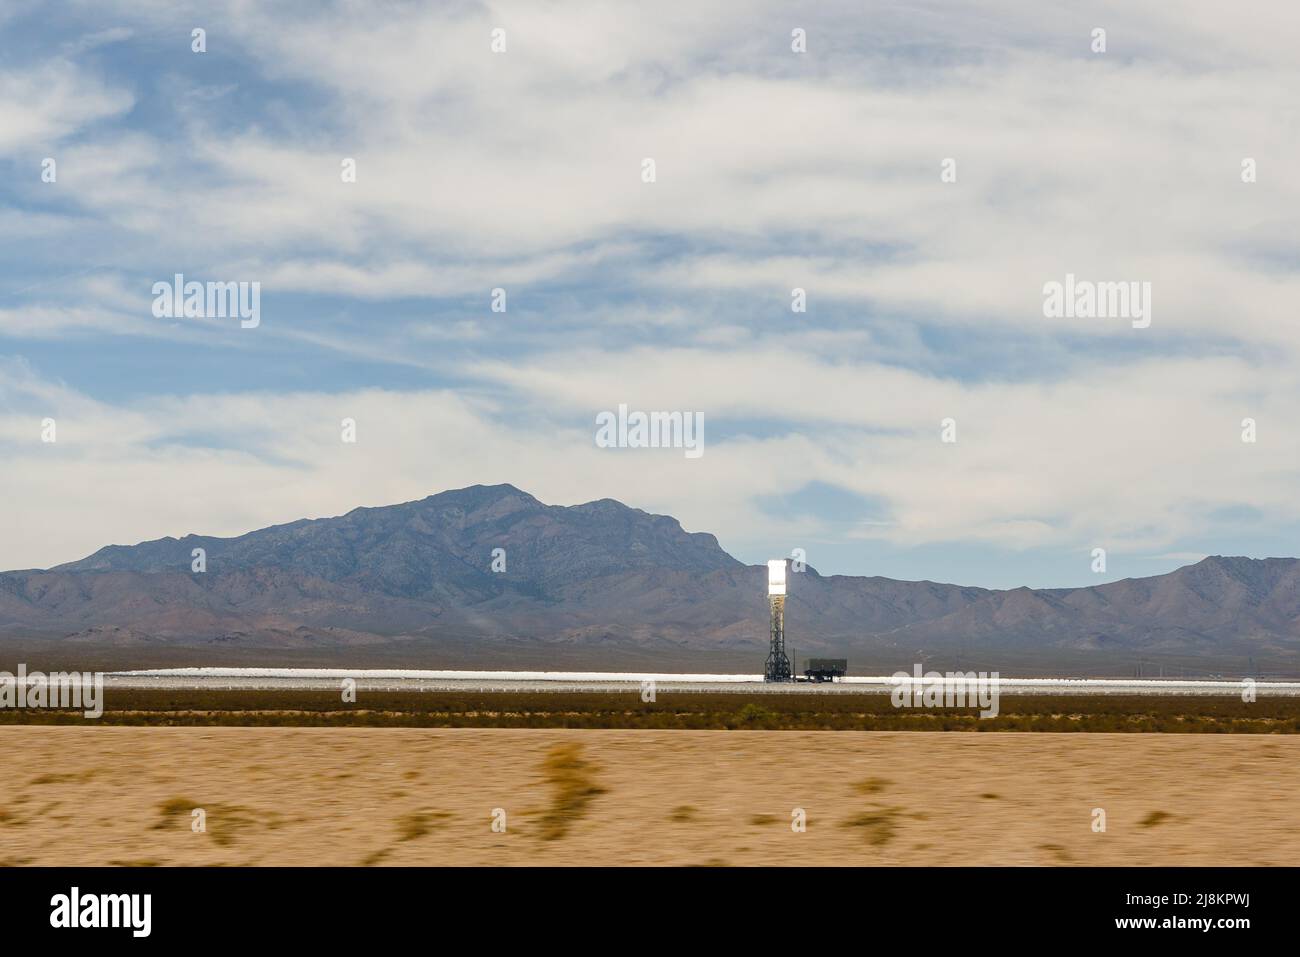 Ivanpah Solar Electric Generating System, solar thermal plant in the Mojave Desert, California, view from a driving car Stock Photo